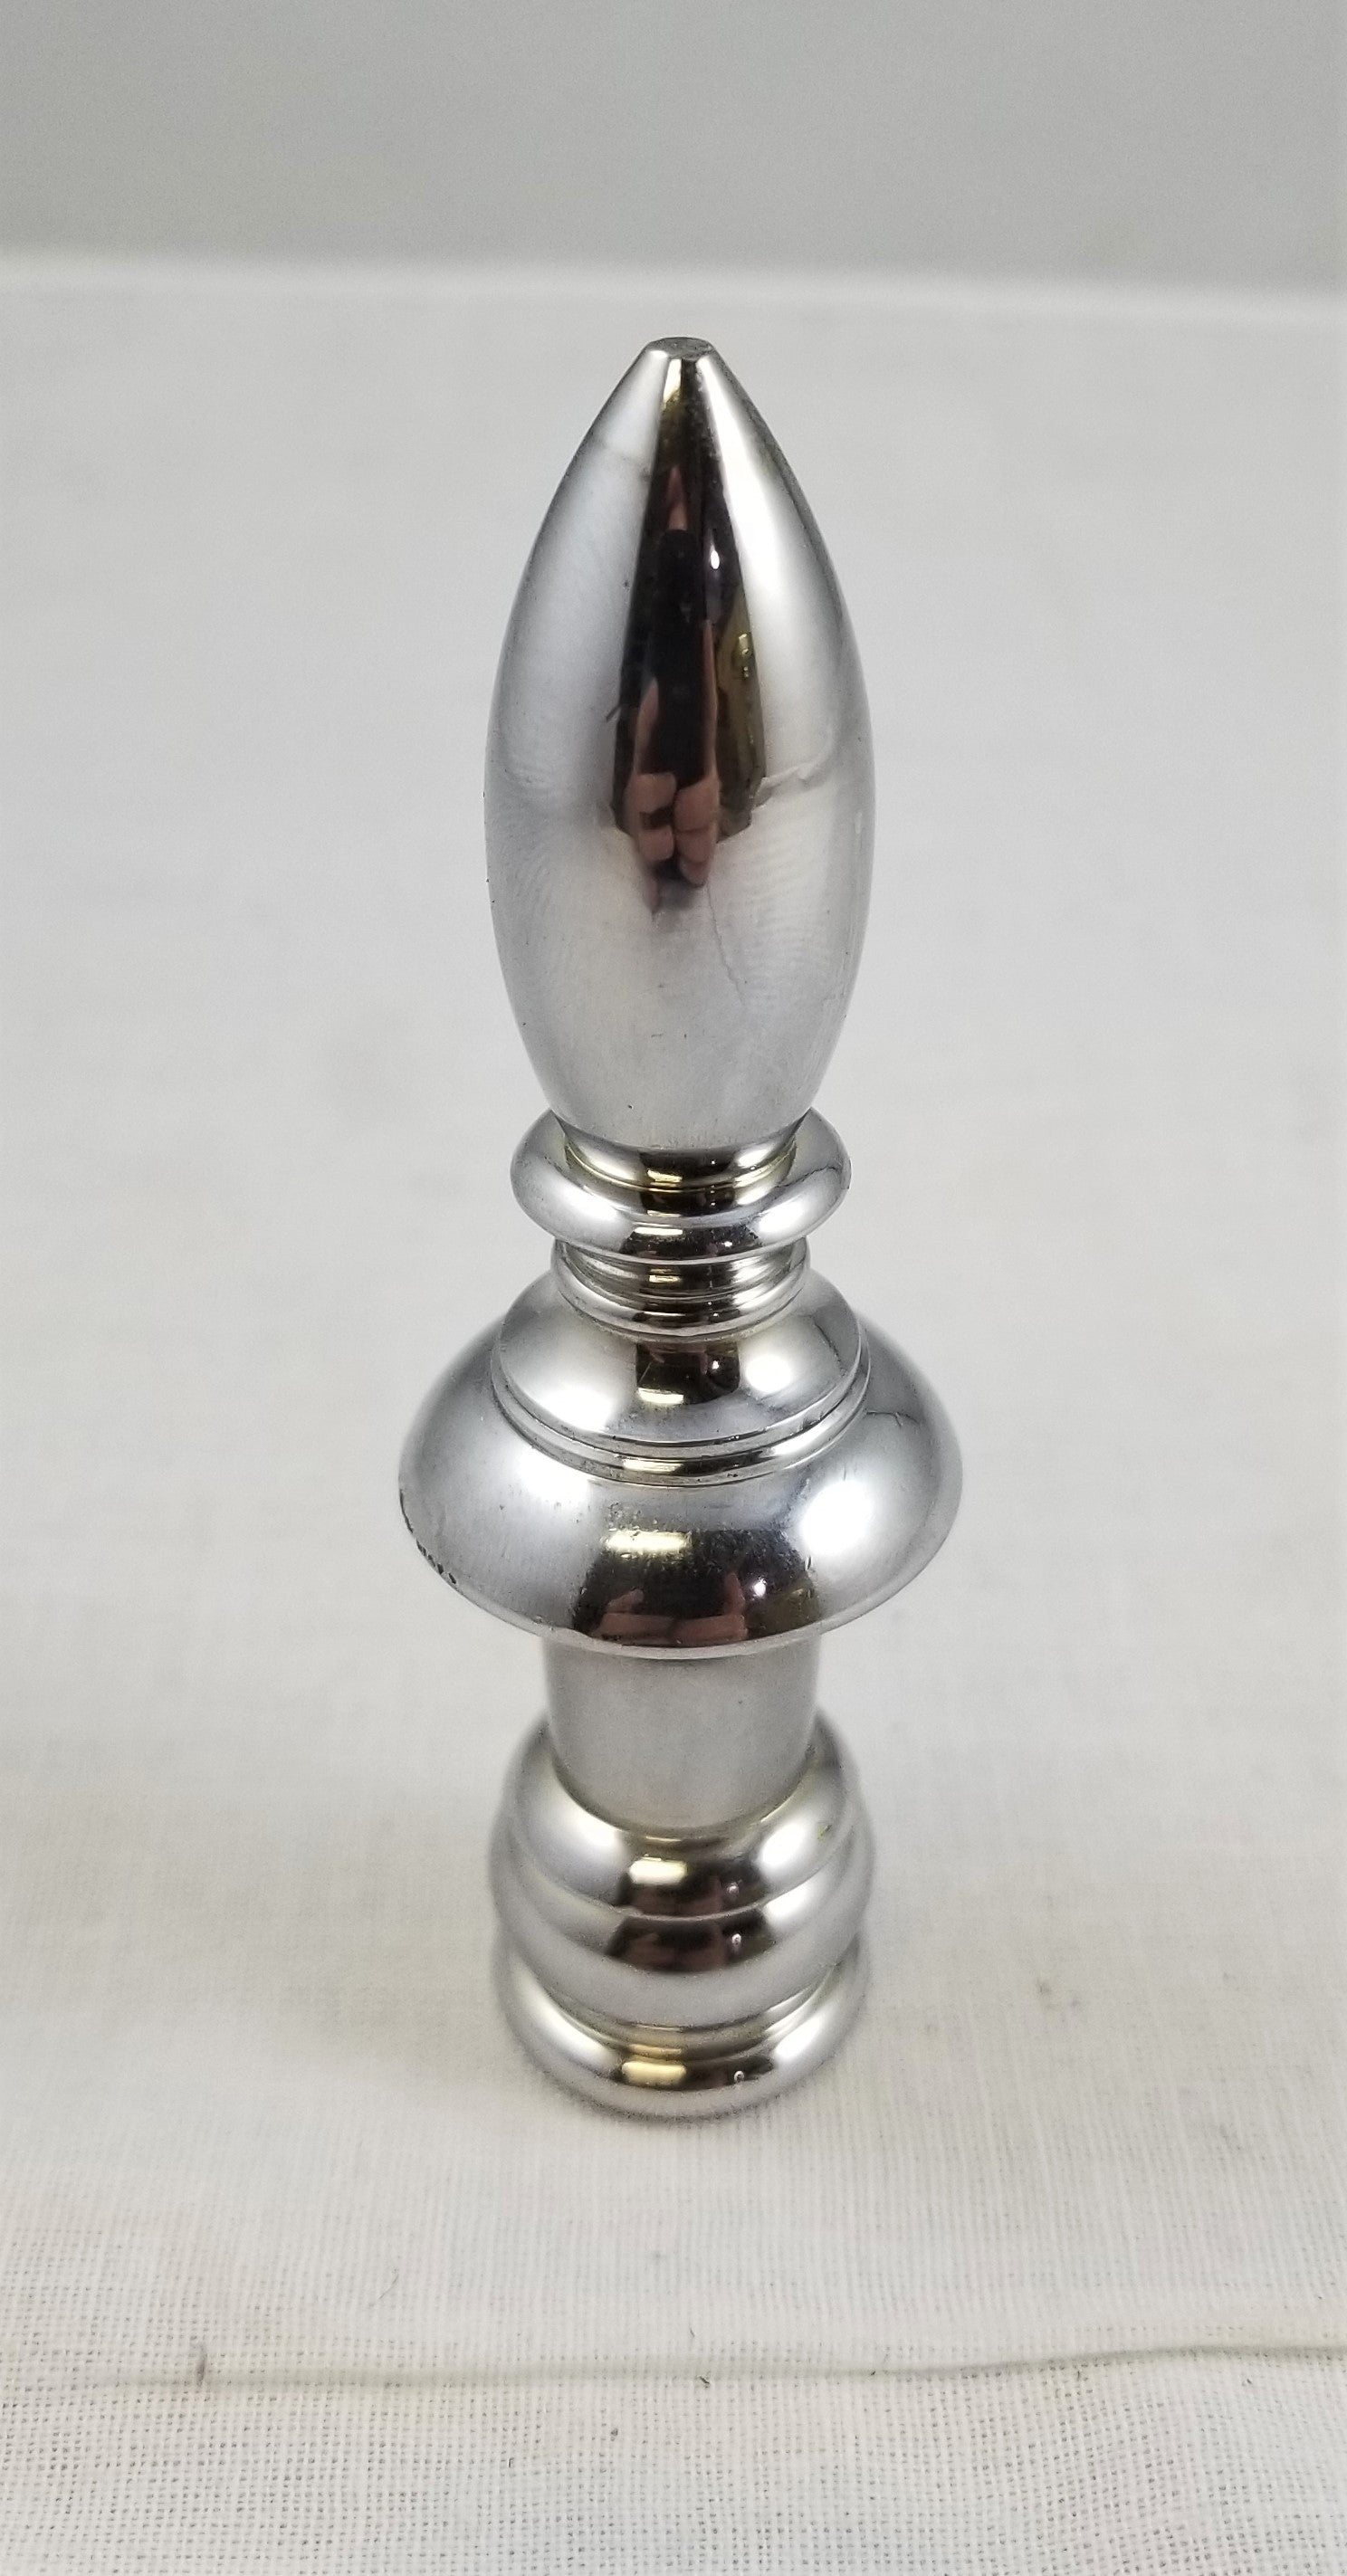 3" Solid Brass Finial - Female - Chrome Plated - Tapped 1/4-27